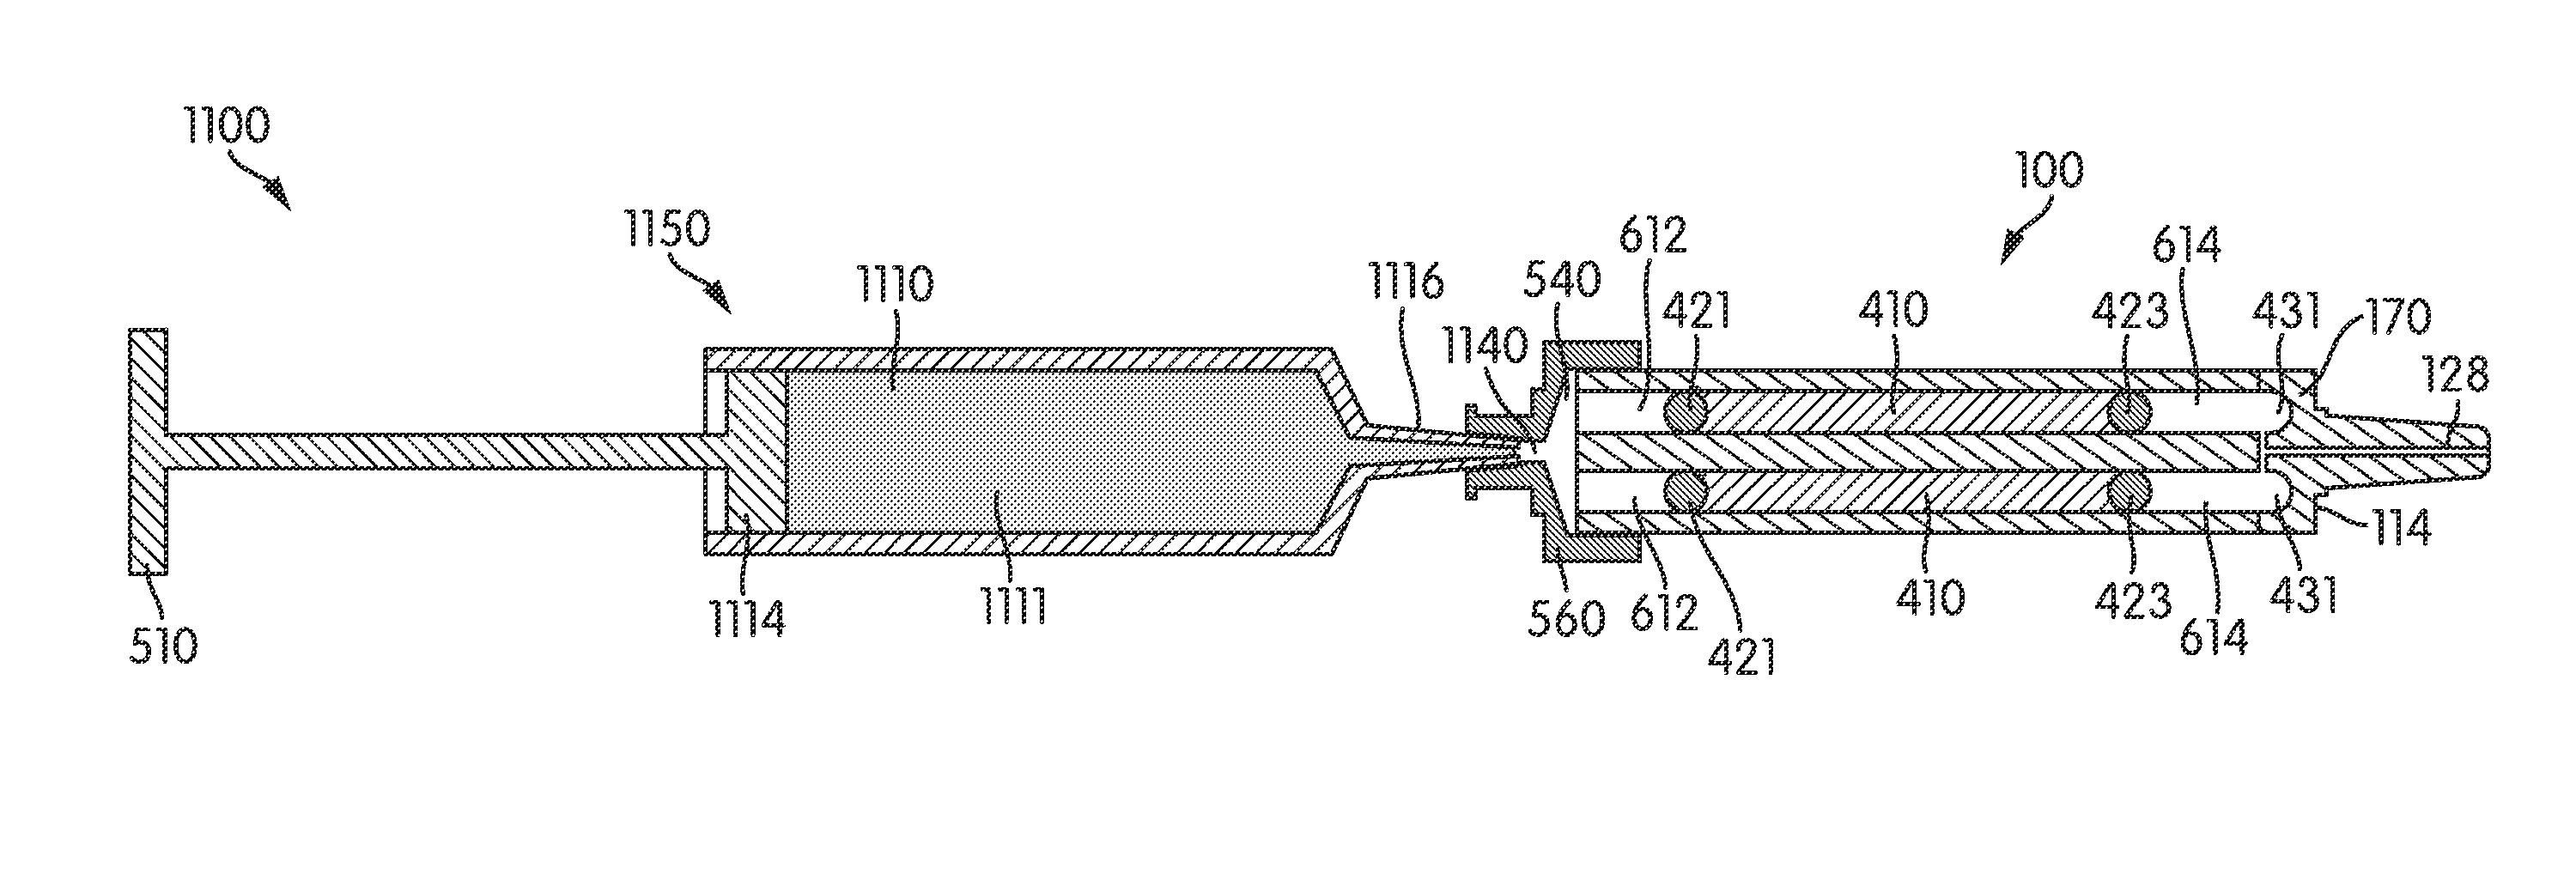 Method of dispensing analytic reference material